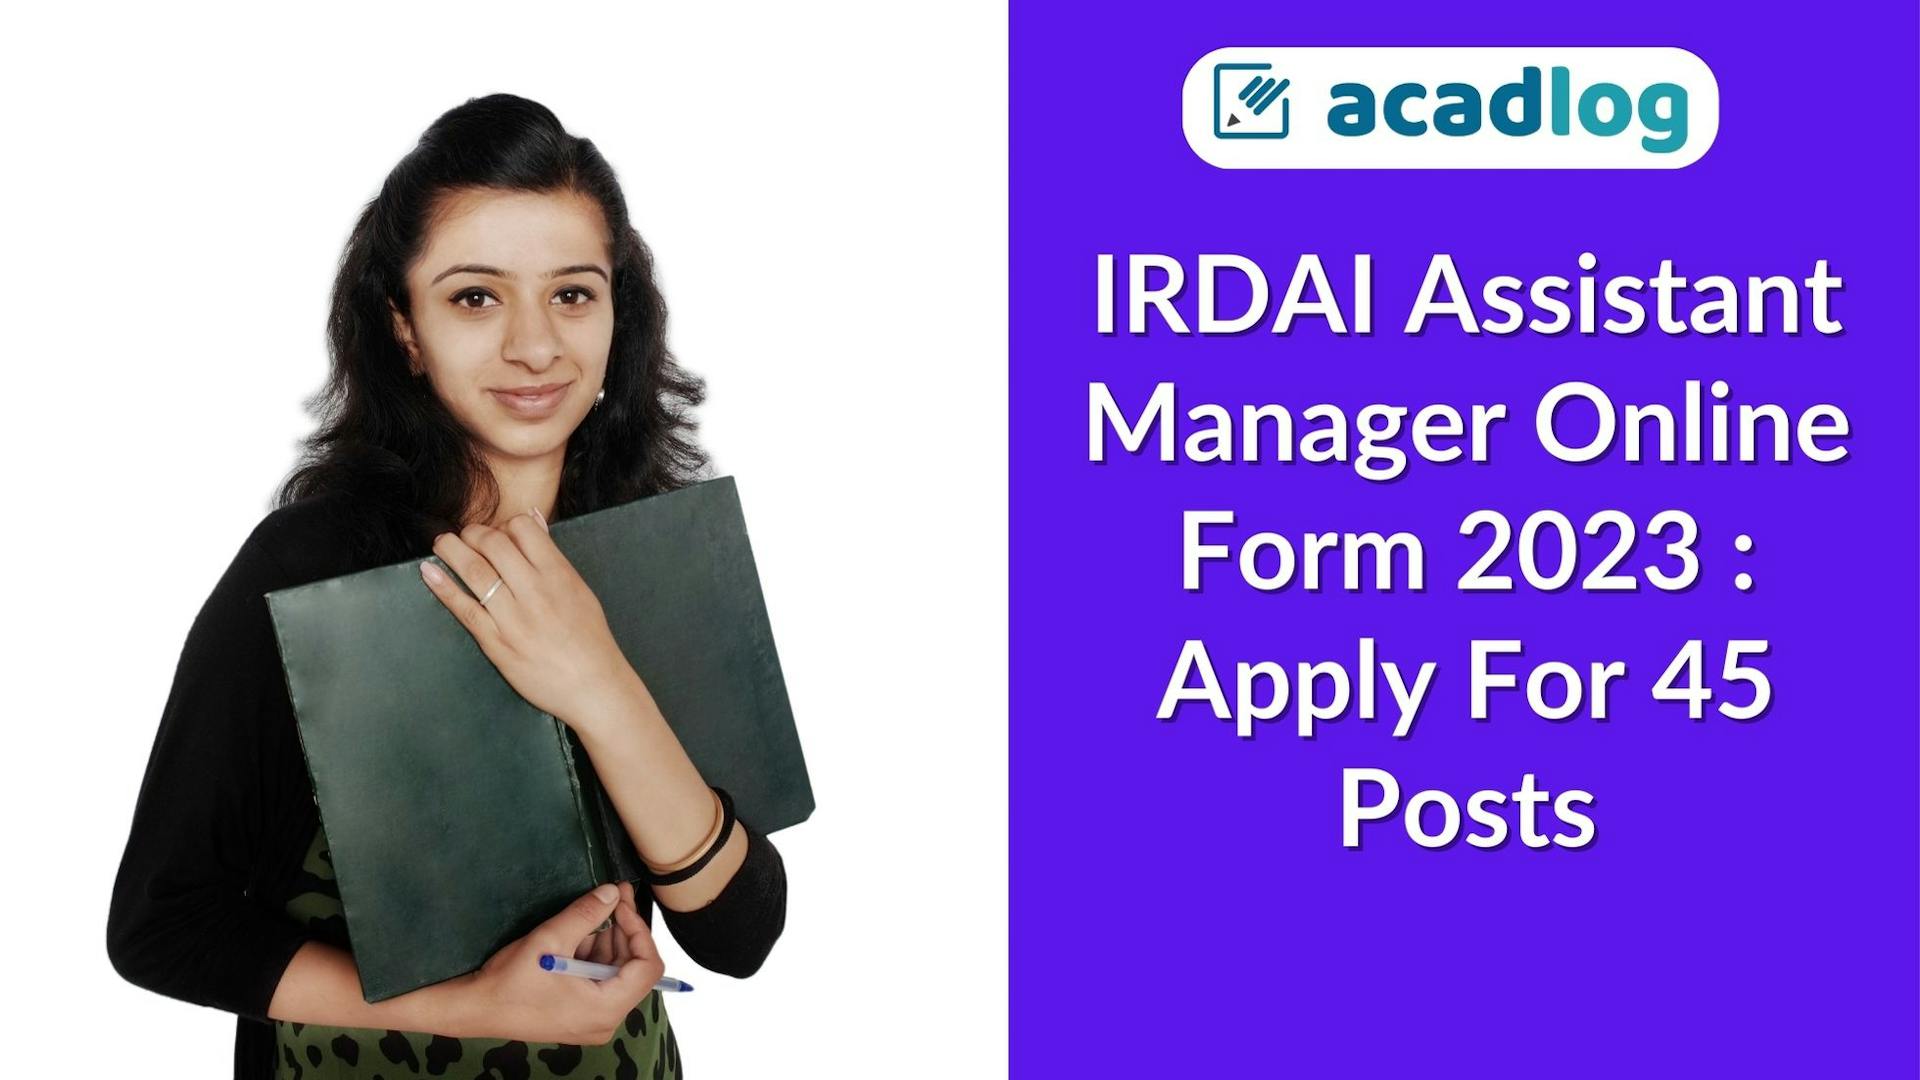 Acadlog: IRDAI Assistant Manager Recruitment 2023 Apply Online for 45 Post